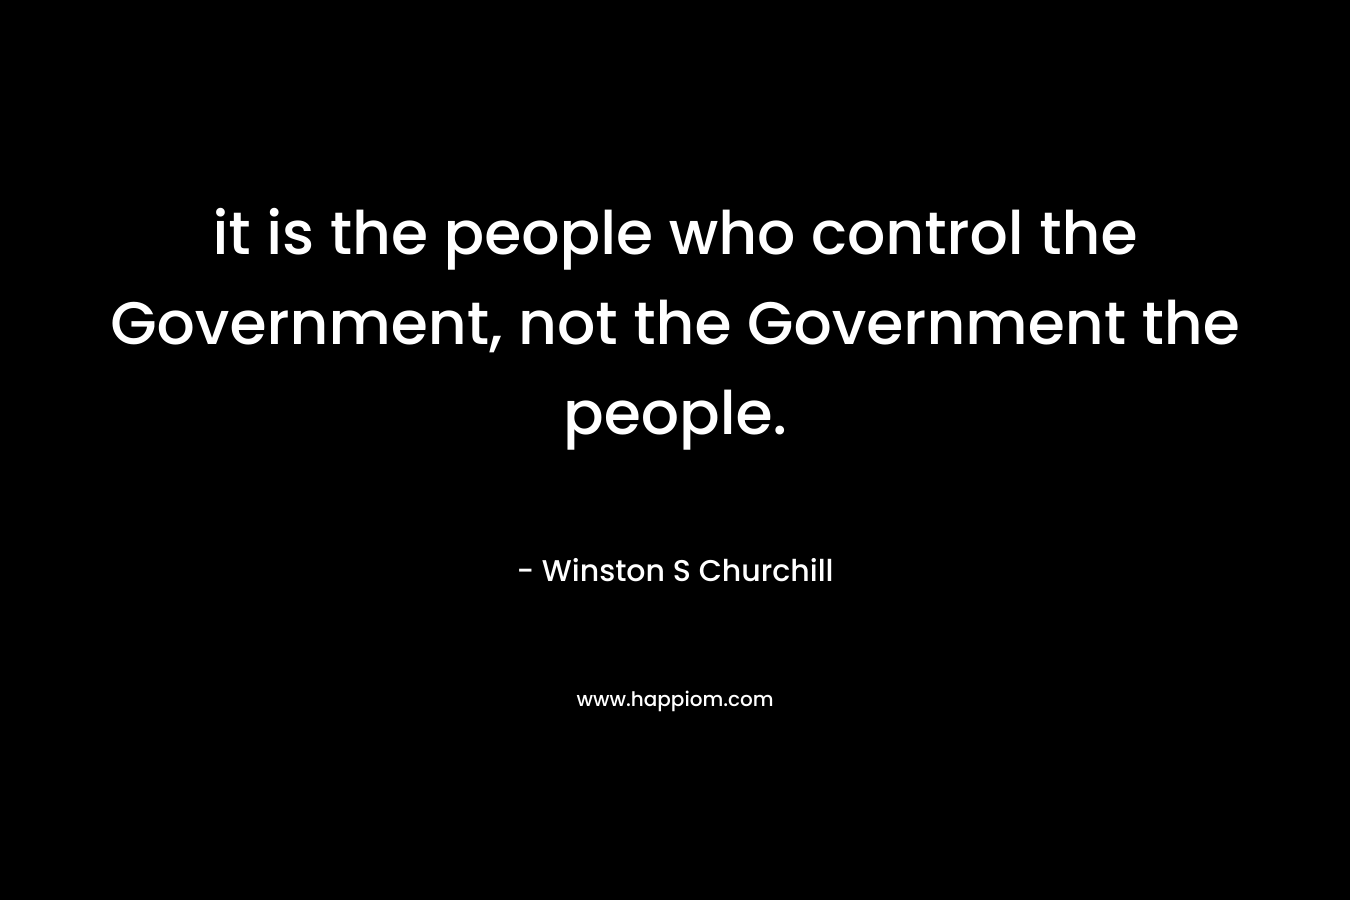 it is the people who control the Government, not the Government the people.